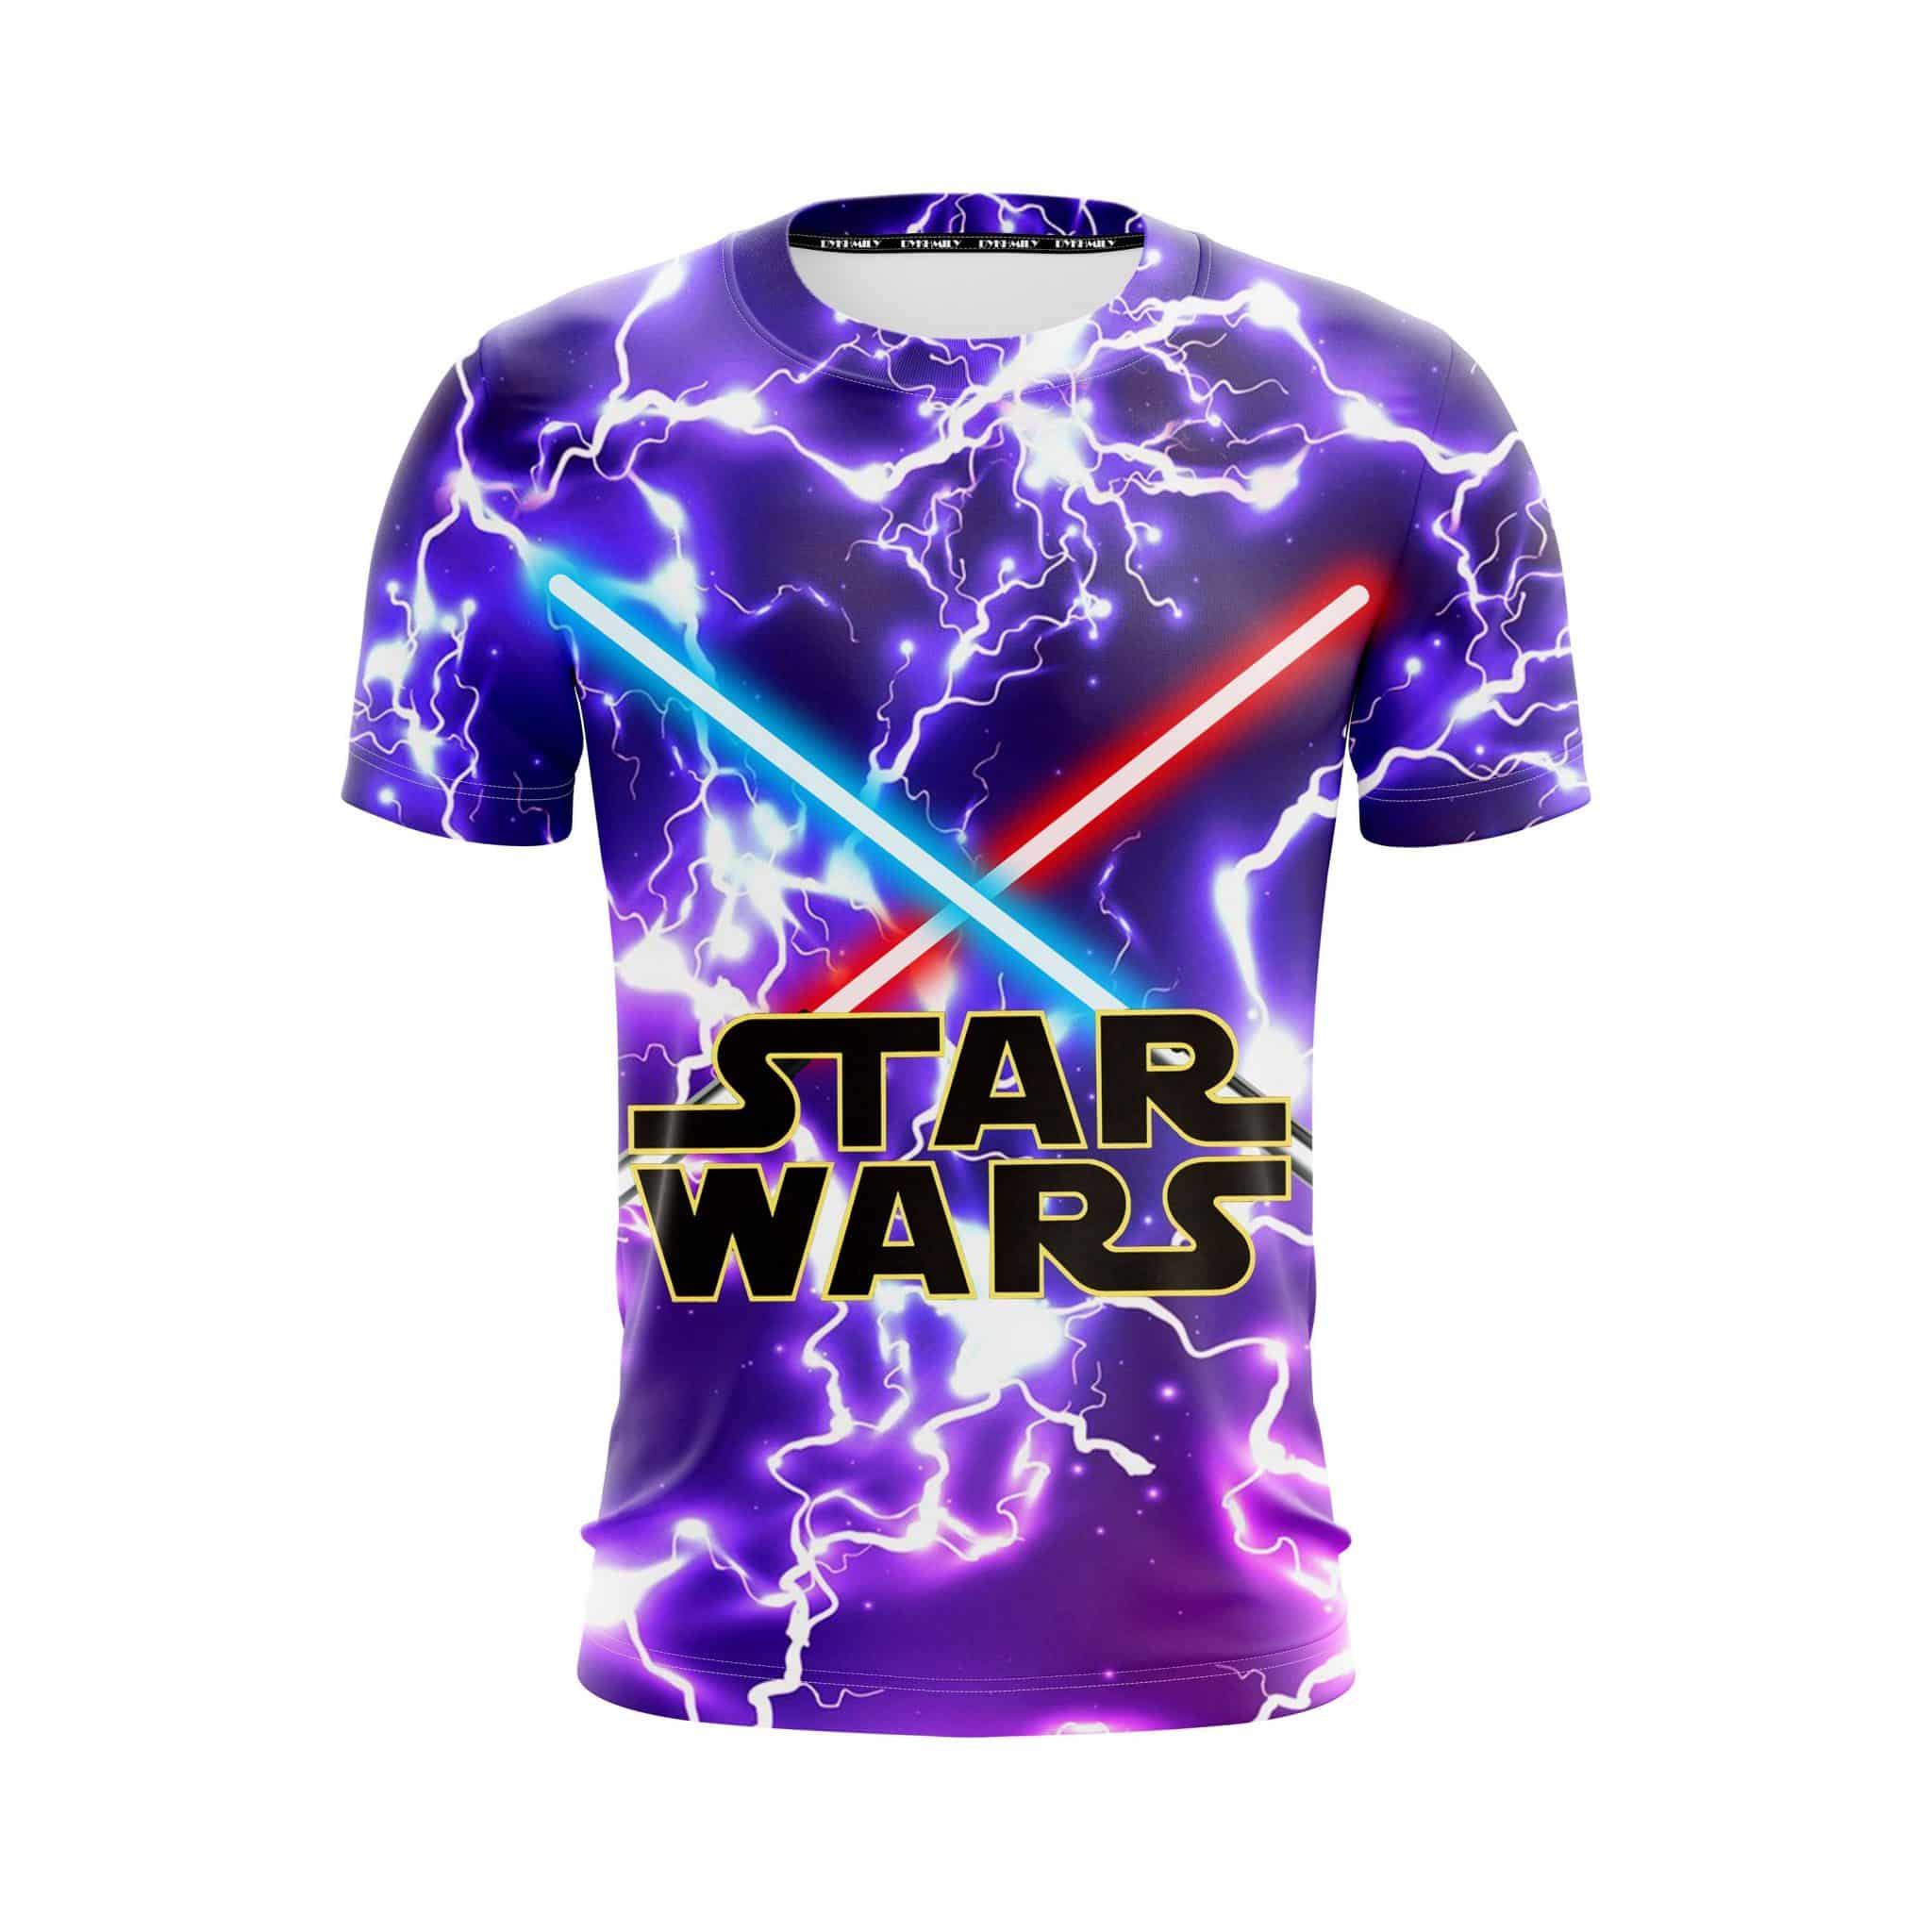 Star Wars Logo With Red T-Shirt & Lightsaber Blue Purple